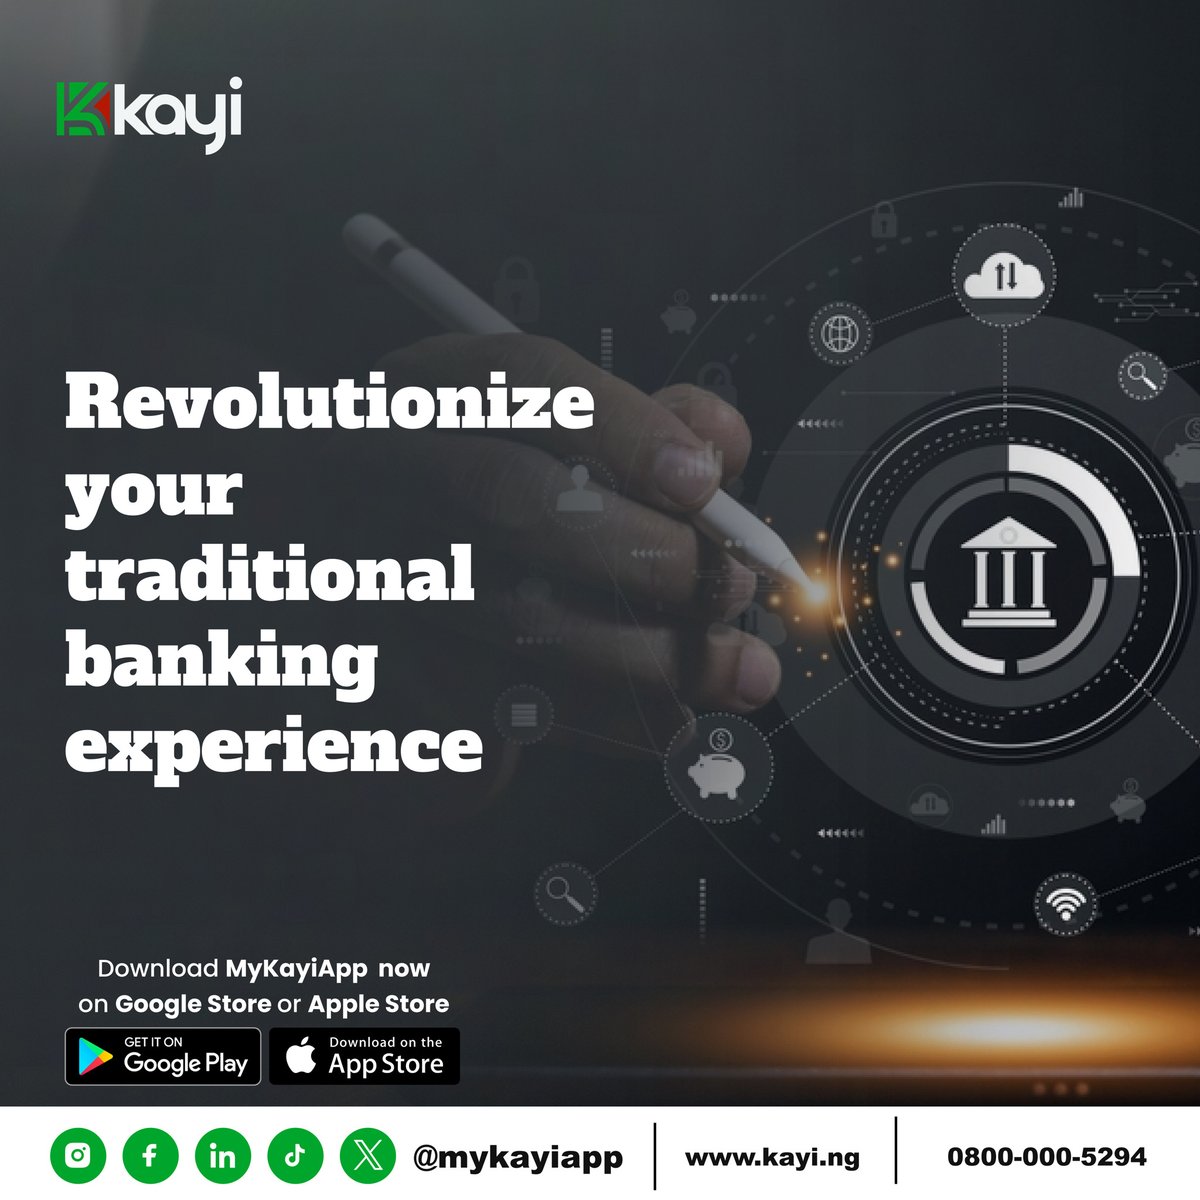 Revolutionize your traditional banking experience with MyKayiApp. Access it now on Google Play Store or Apple Store to unlock a dynamic digital financial journey with endless possibilities.

#MyKayiApp #NowLive #Kayiway #DownloadNow #downloadmykayiapp